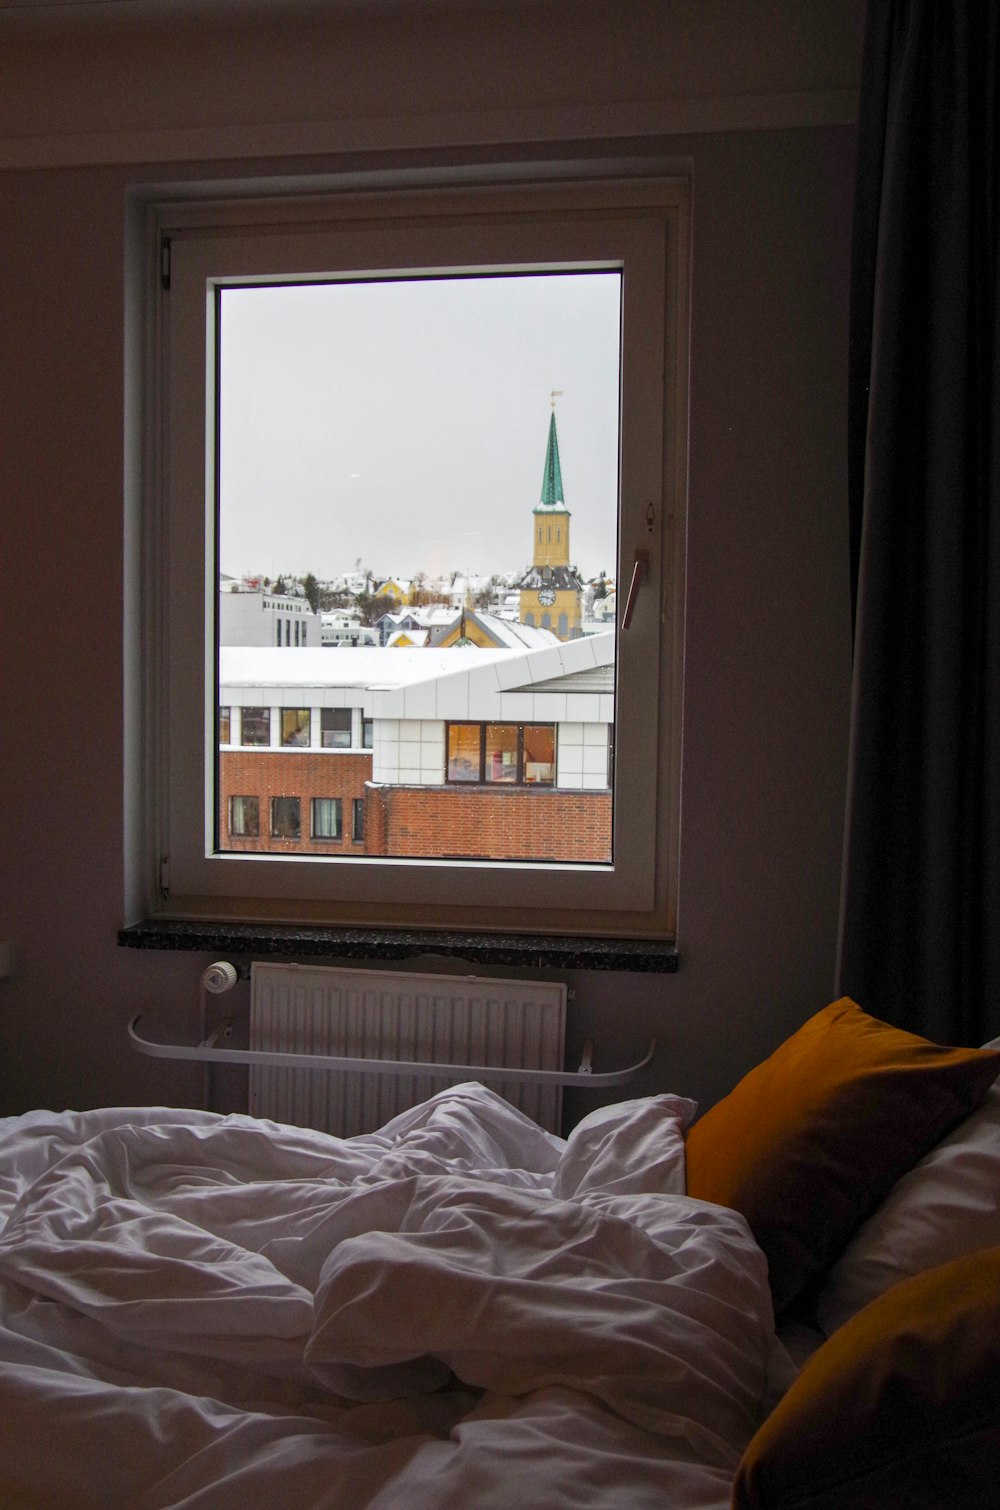 a bed with a white comforter and a window with a view of a city